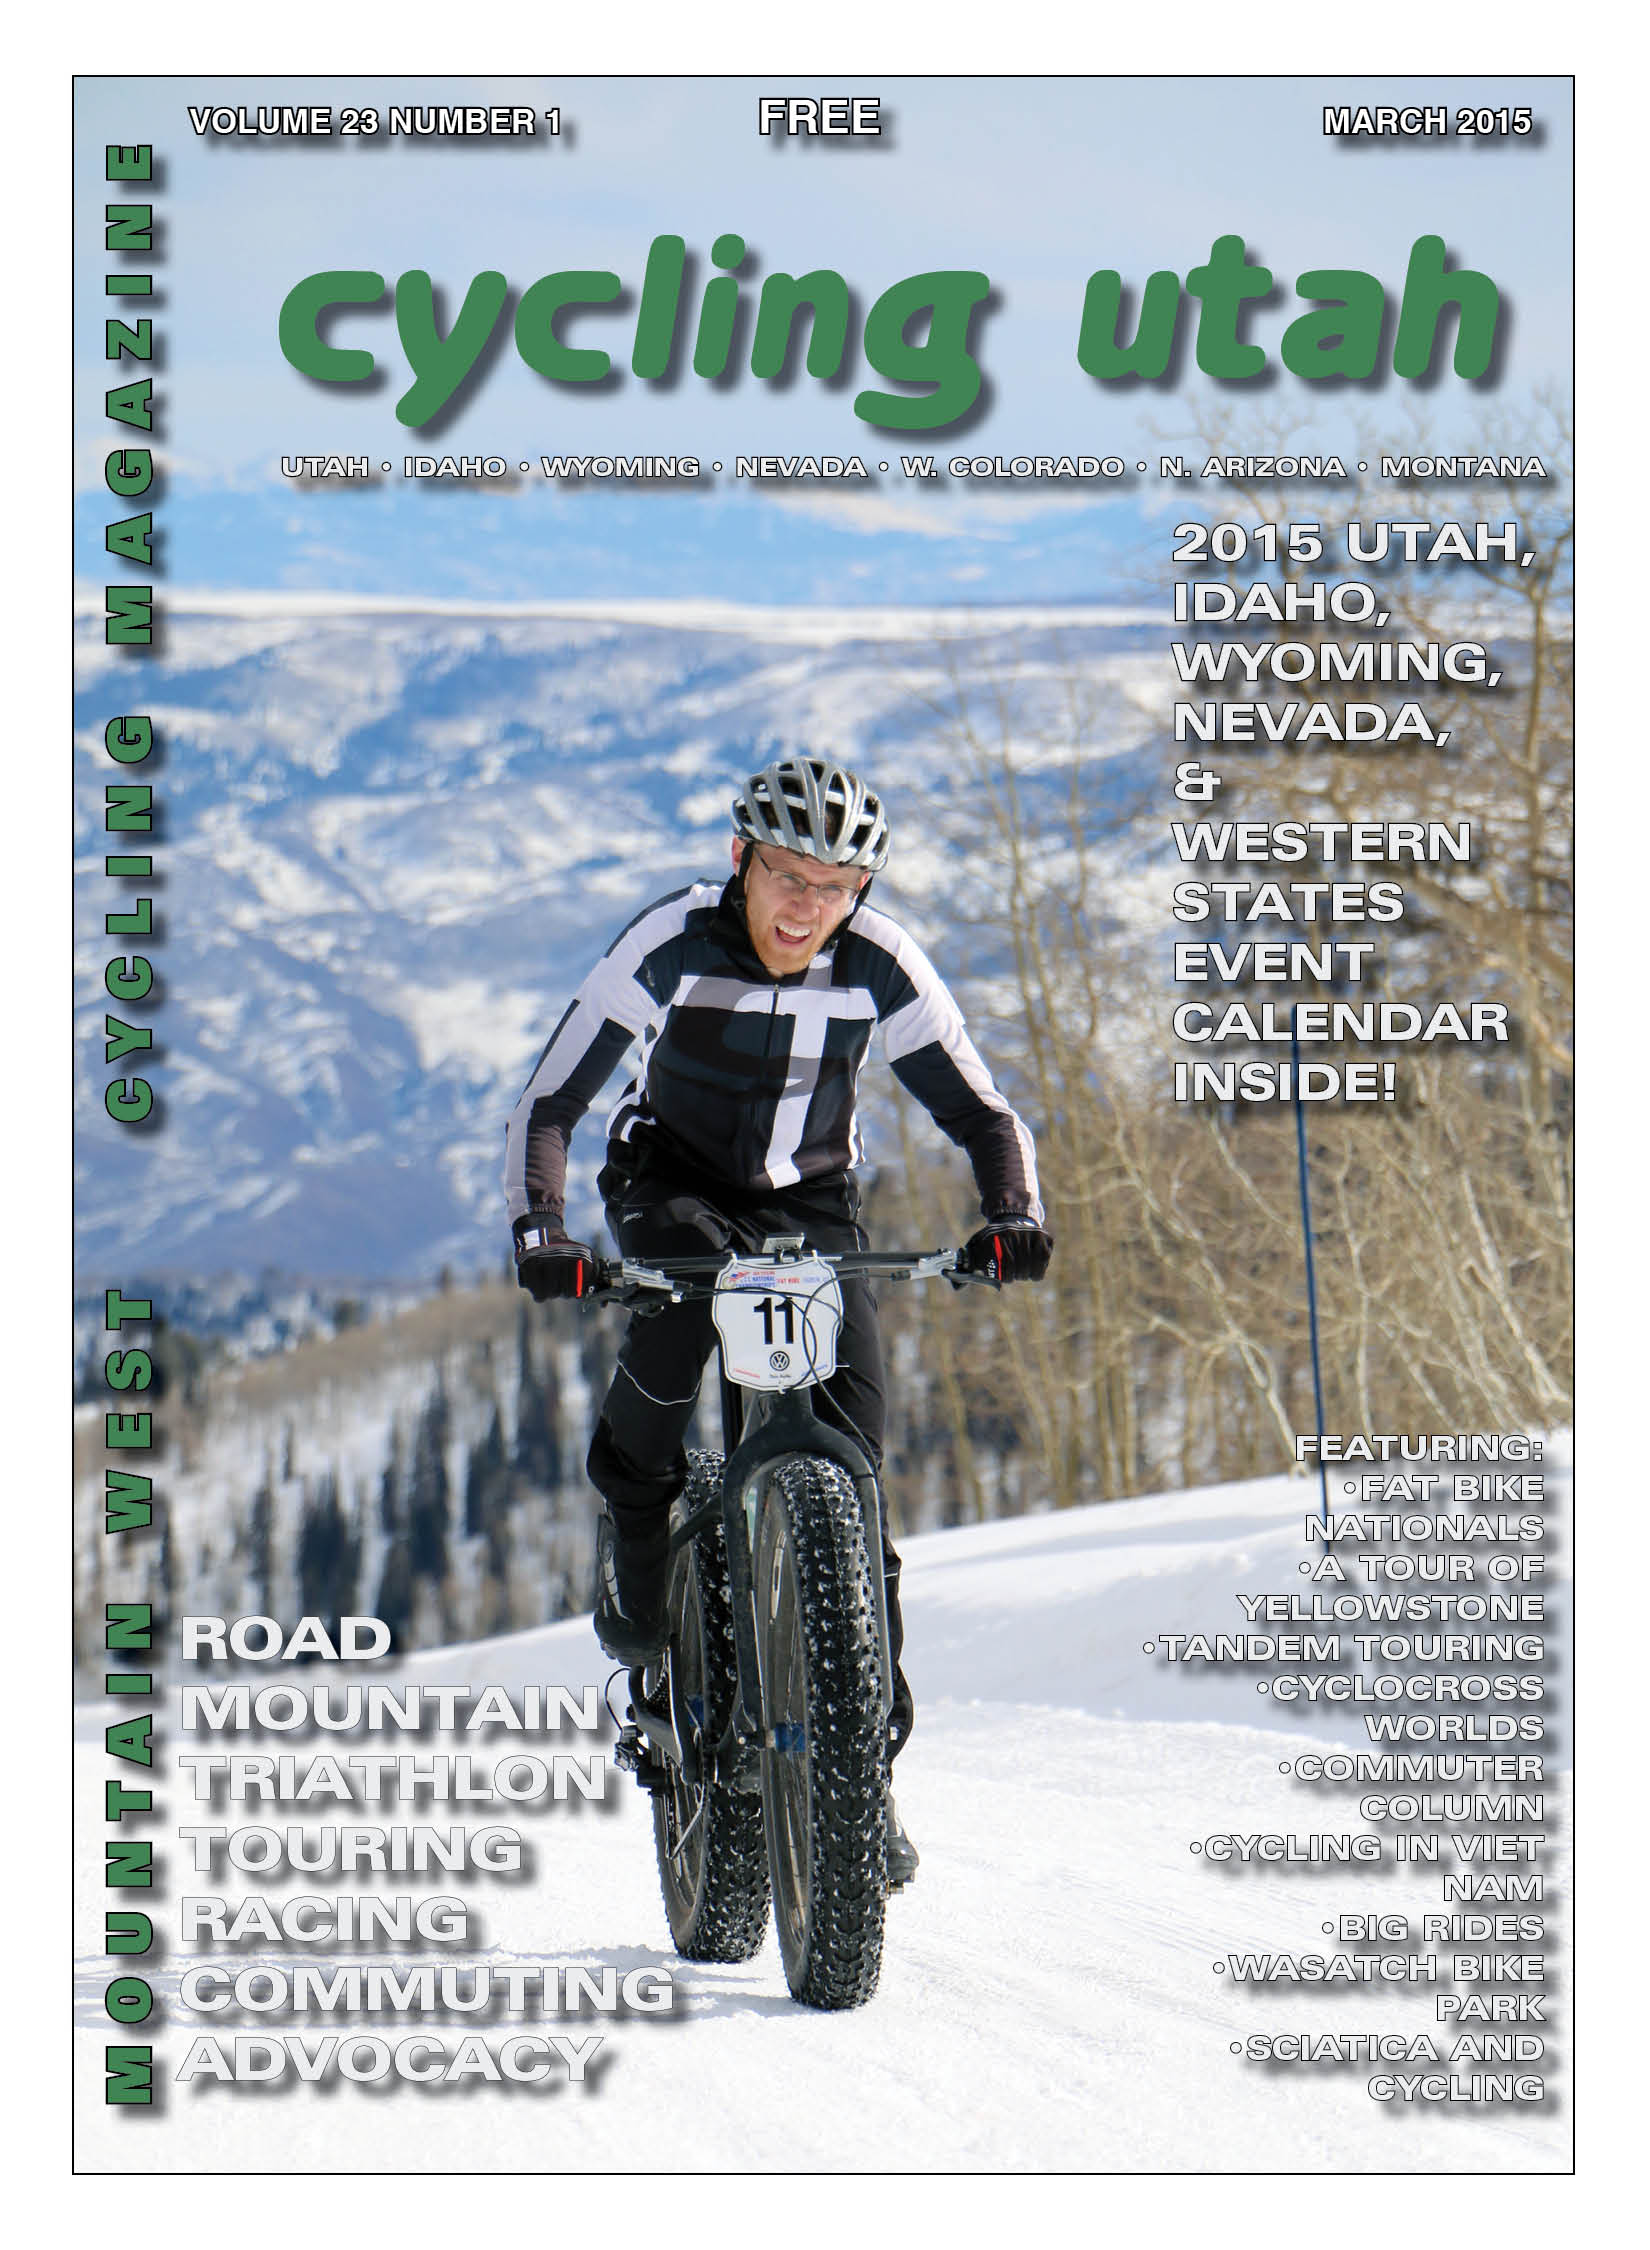 Cycling Utah’s March 2015 Issue is Now Available!